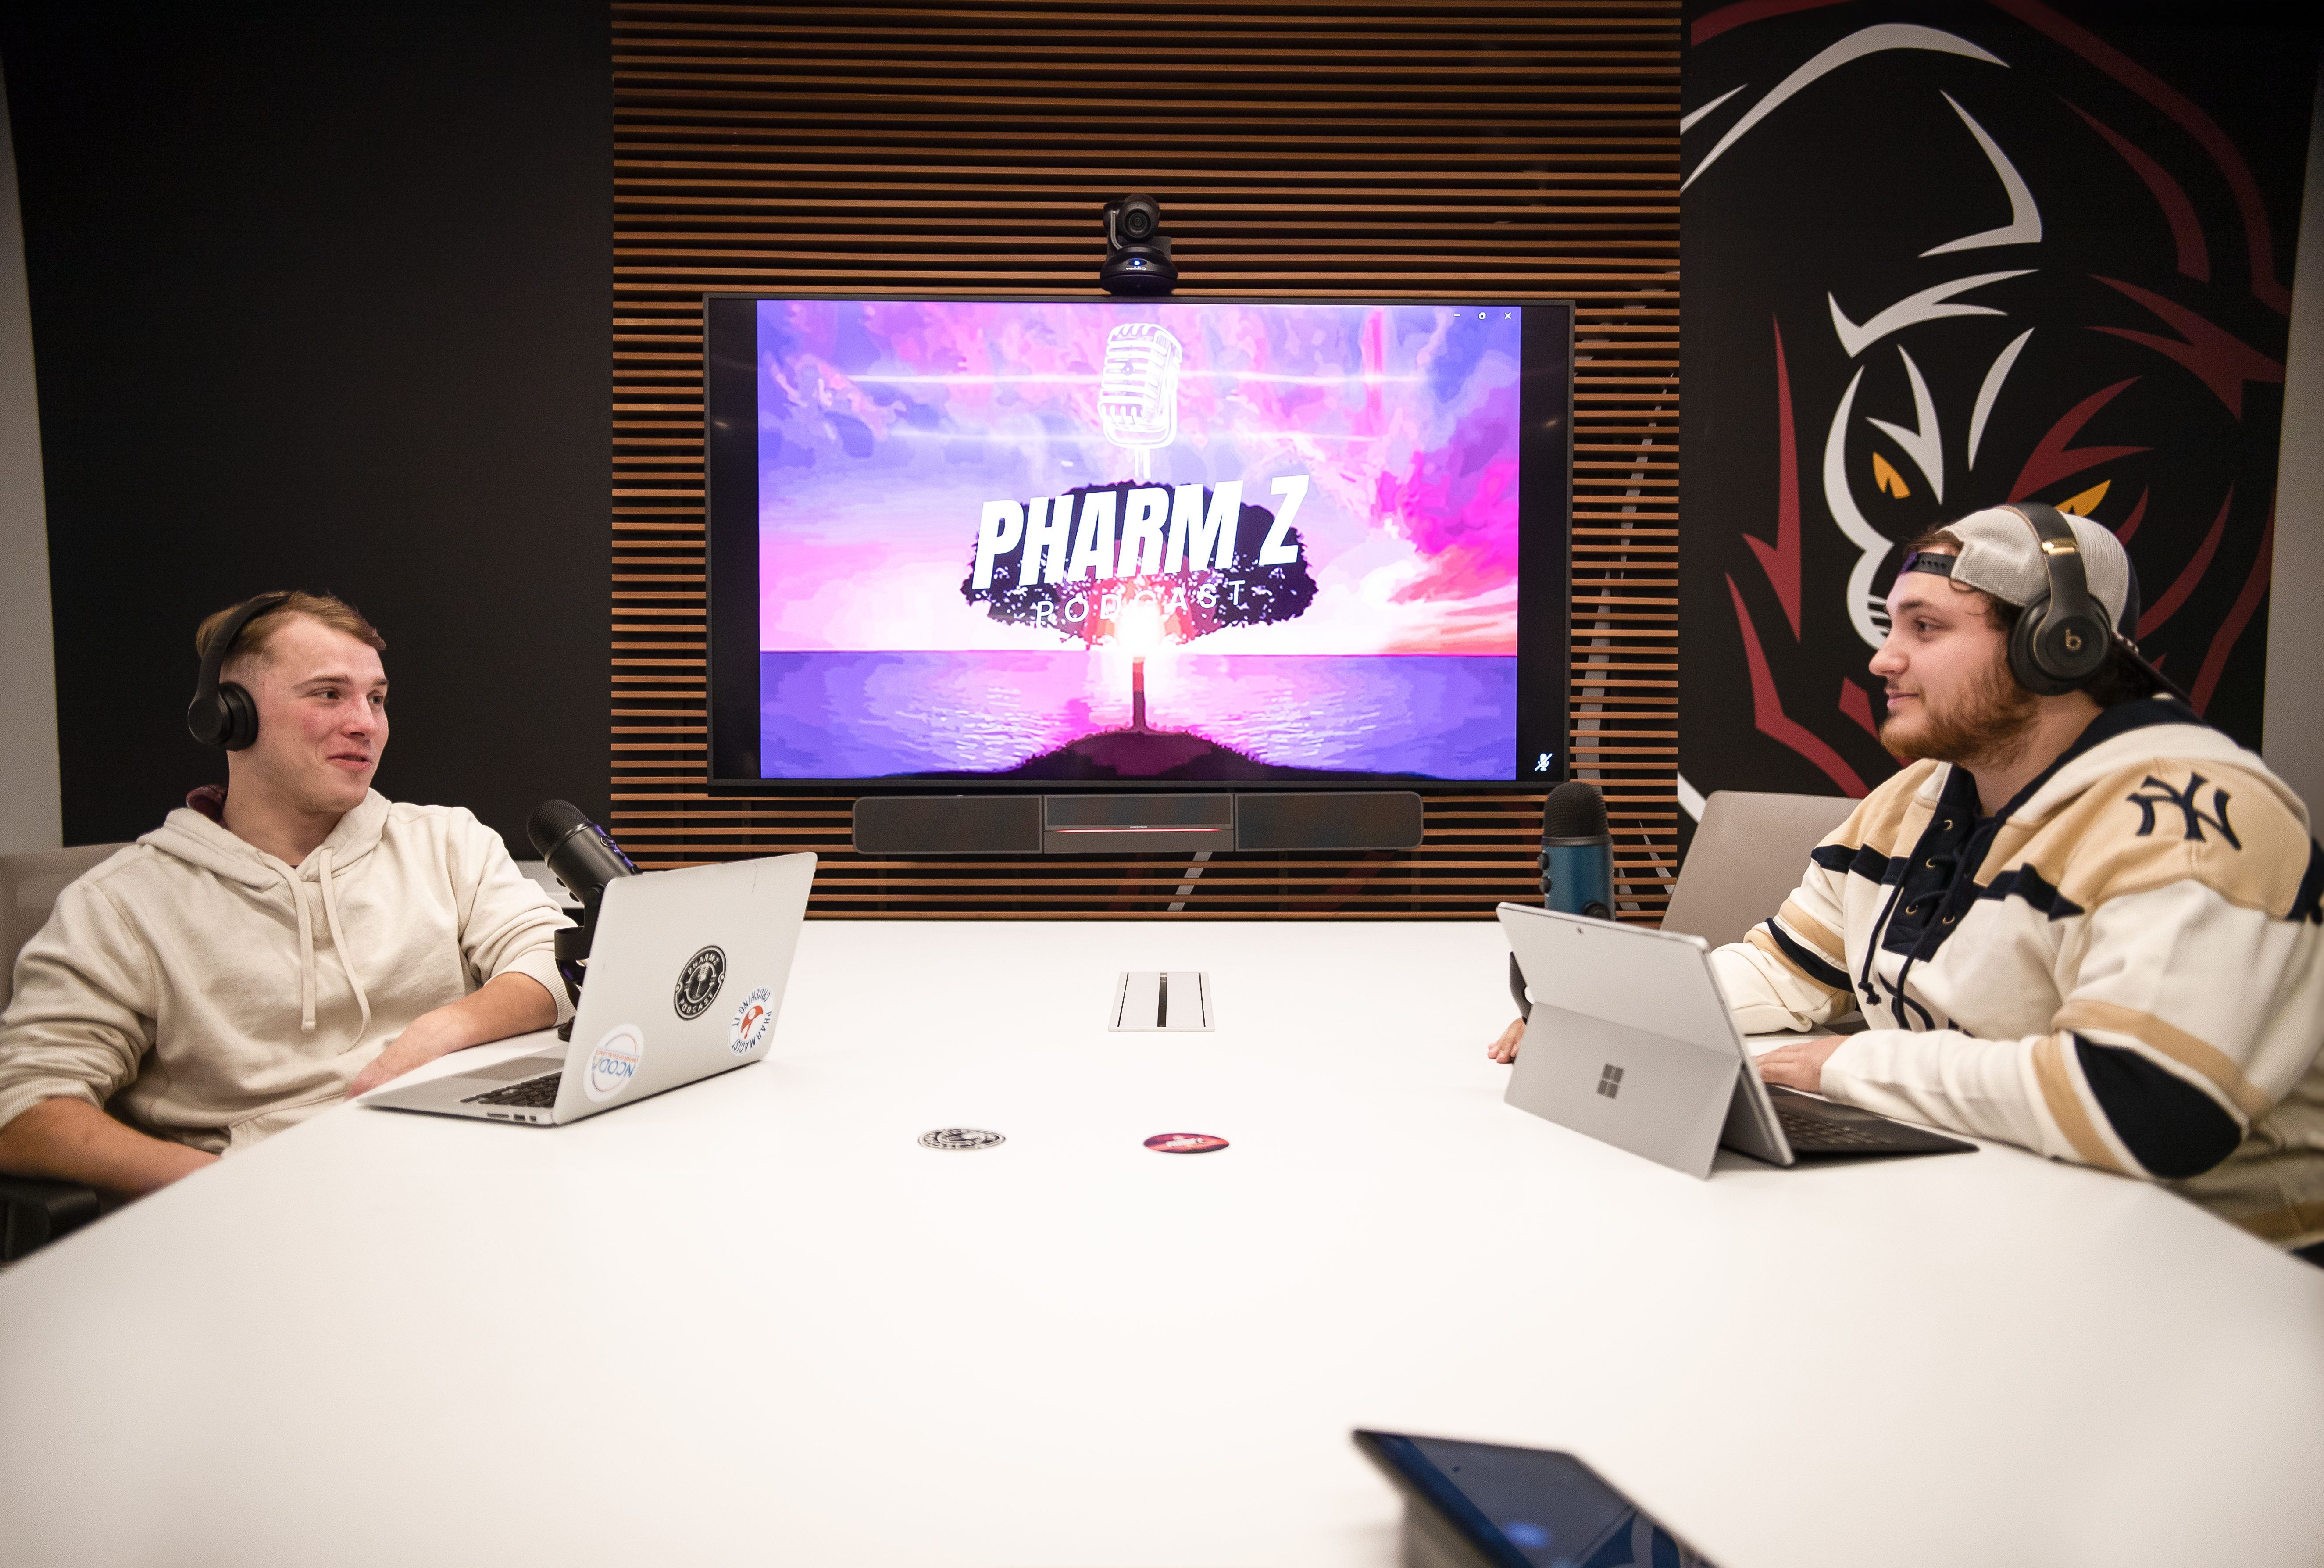 Austin Lewerk (left) and Dylan Knapp create the PharmZ podcast, in the Panther's Den conference room